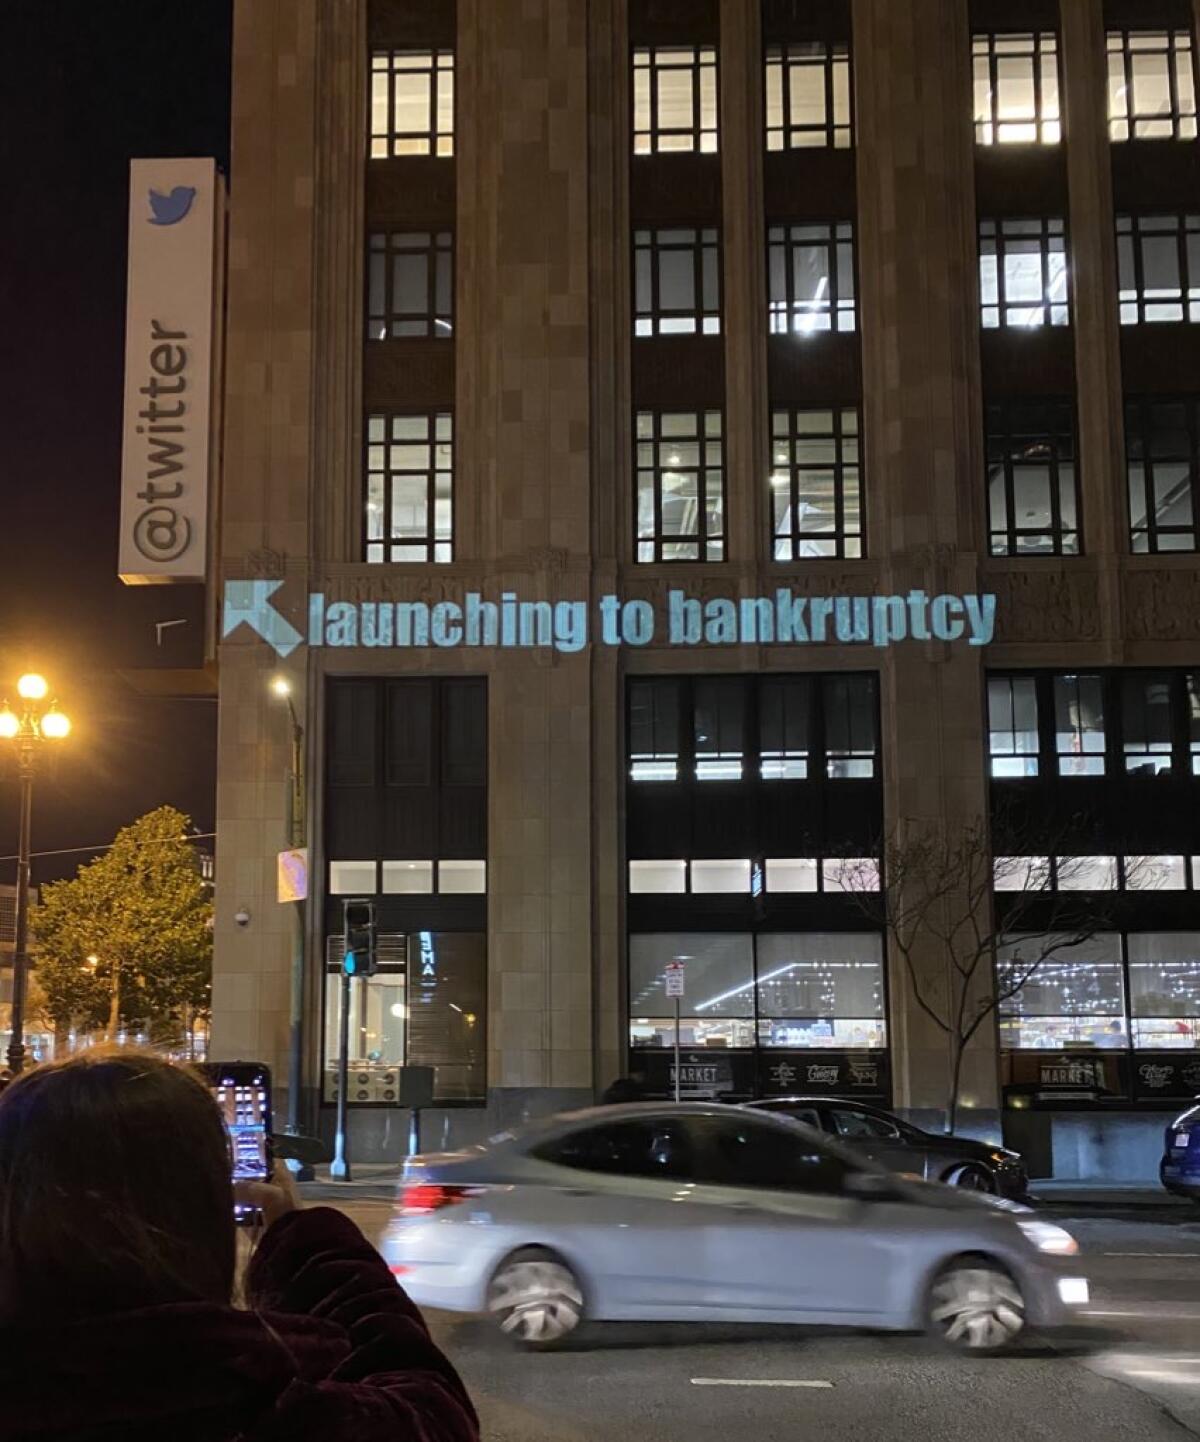 Large office building at night with "Launching to bankruptcy" projected on the front, pointing to a Twitter logo